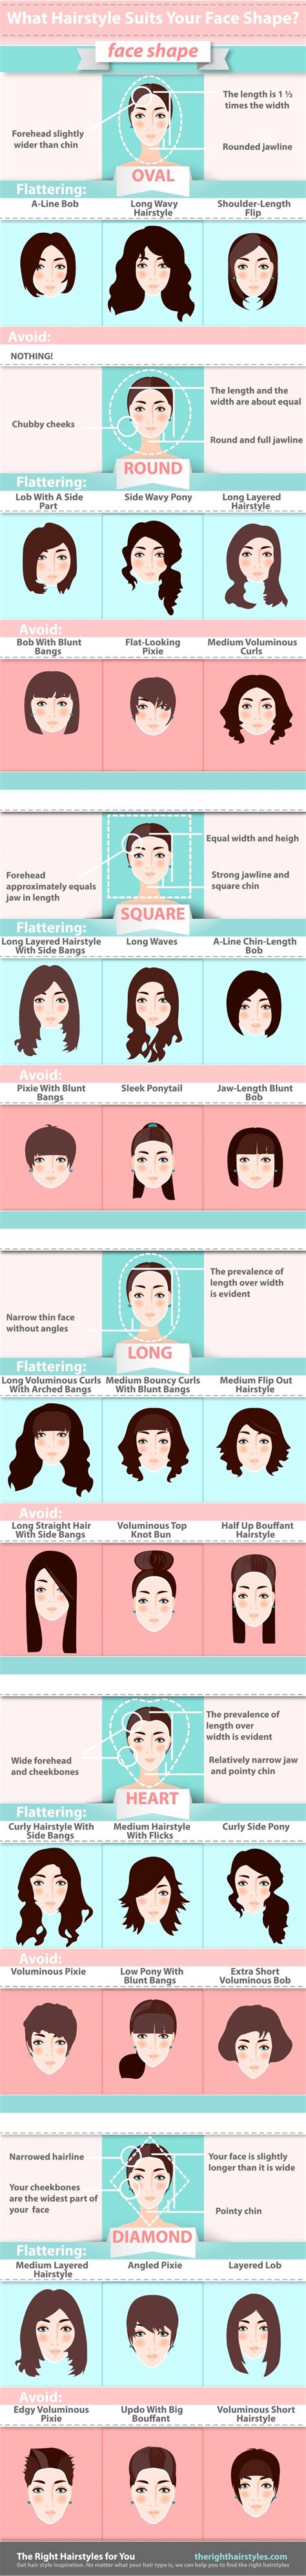 When you choose a hairstyle, what do you take into account? How To Choose A Haircut According To Your Face Shape?